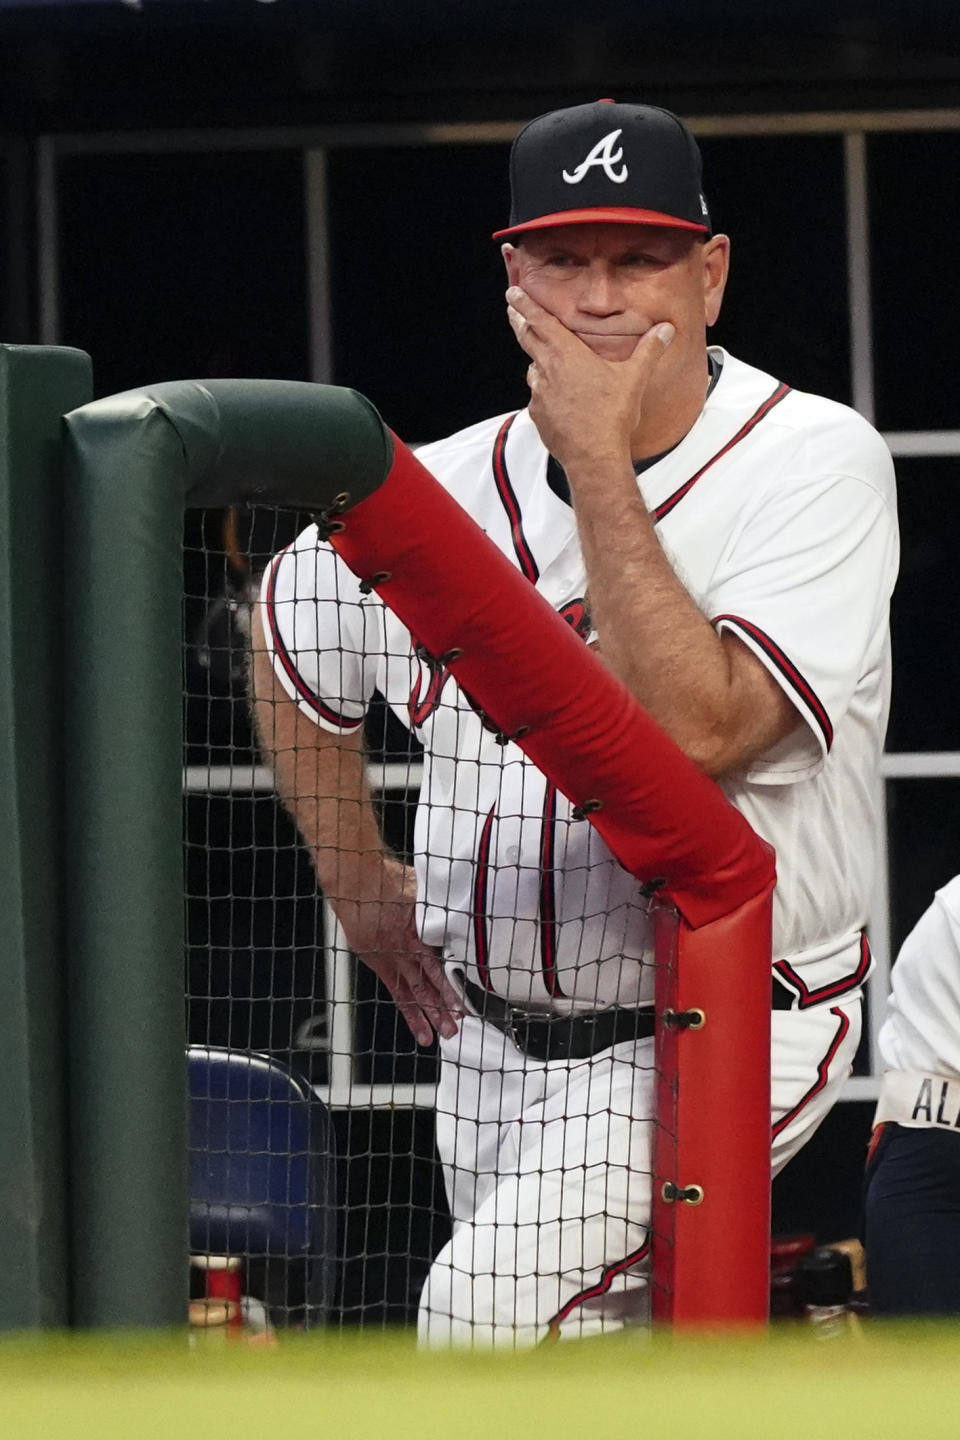 Atlanta Braves manager Brian Snitker (43) watches from the dugout during a baseball game against the Boston Red Sox Tuesday, May 10, 2022, in Atlanta. (AP Photo/John Bazemore)